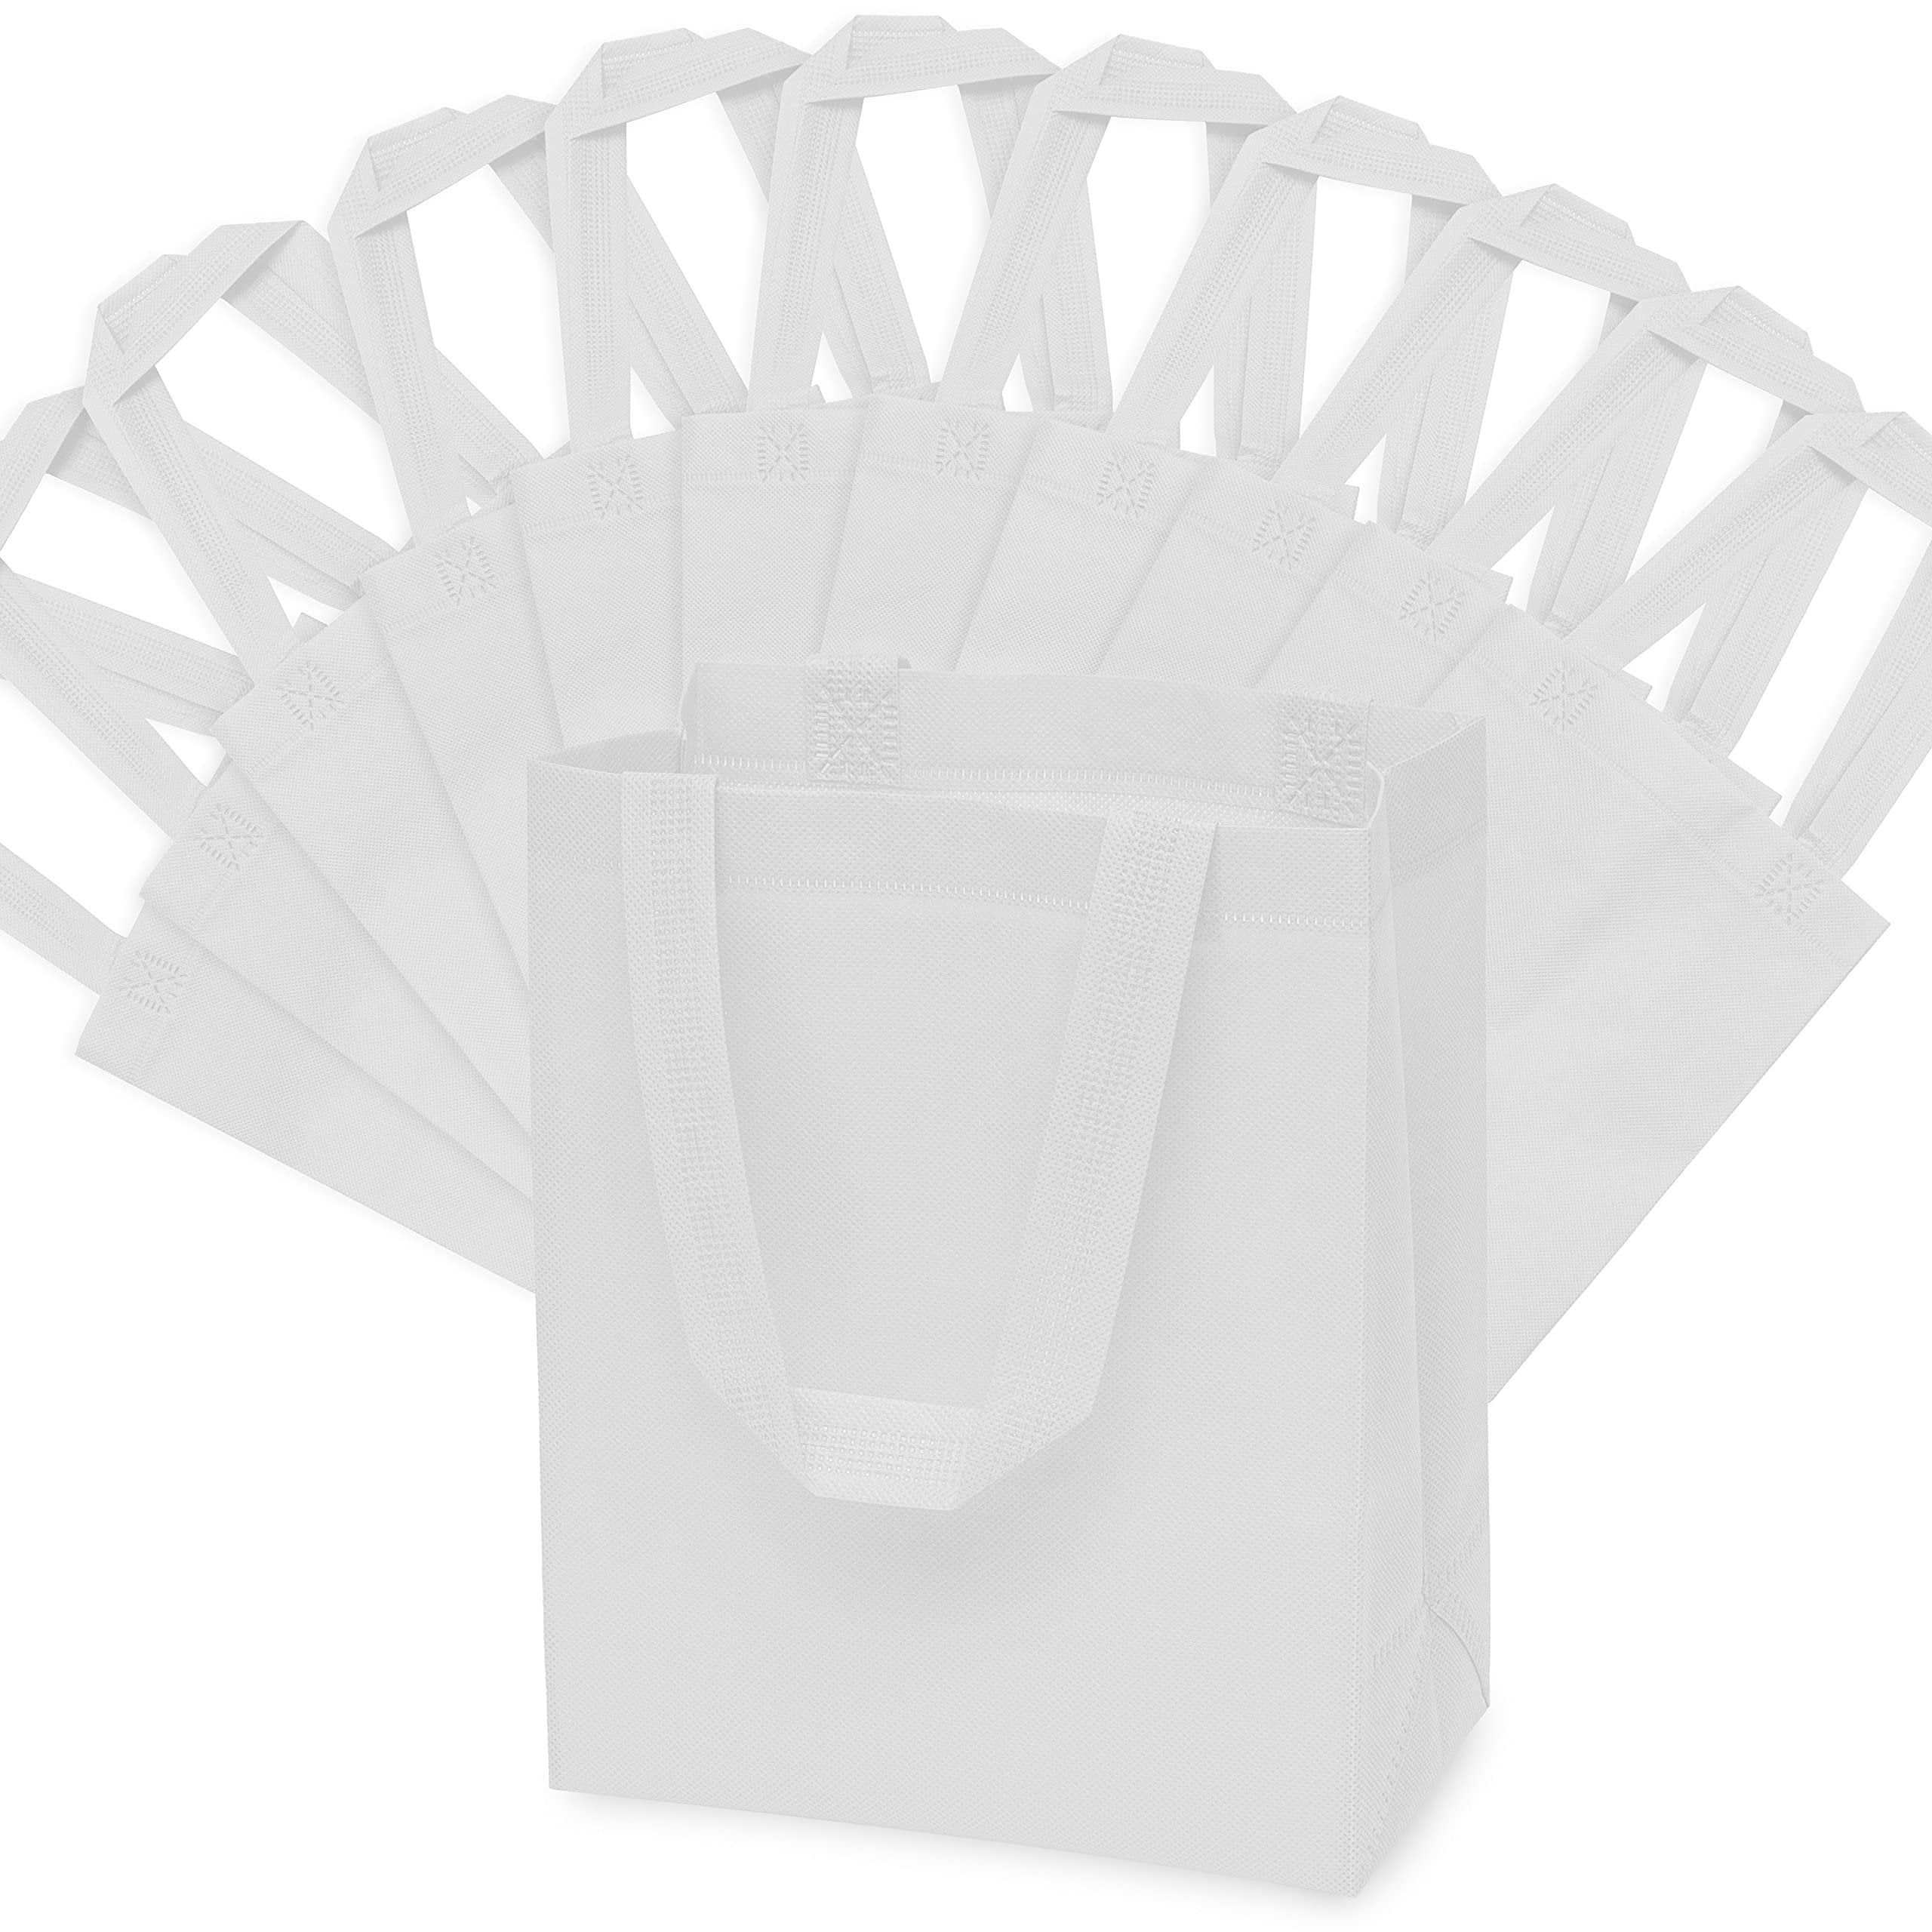 Reusable Gift Bags - 12 Pack Small Totes with Handles, Strong White Eco Friendly Fabric Cloth for Shopping, Merchandise, Events, Parties, Take-Out, Boutiques, Retail Stores, Small Business Bulk - 8x4x10